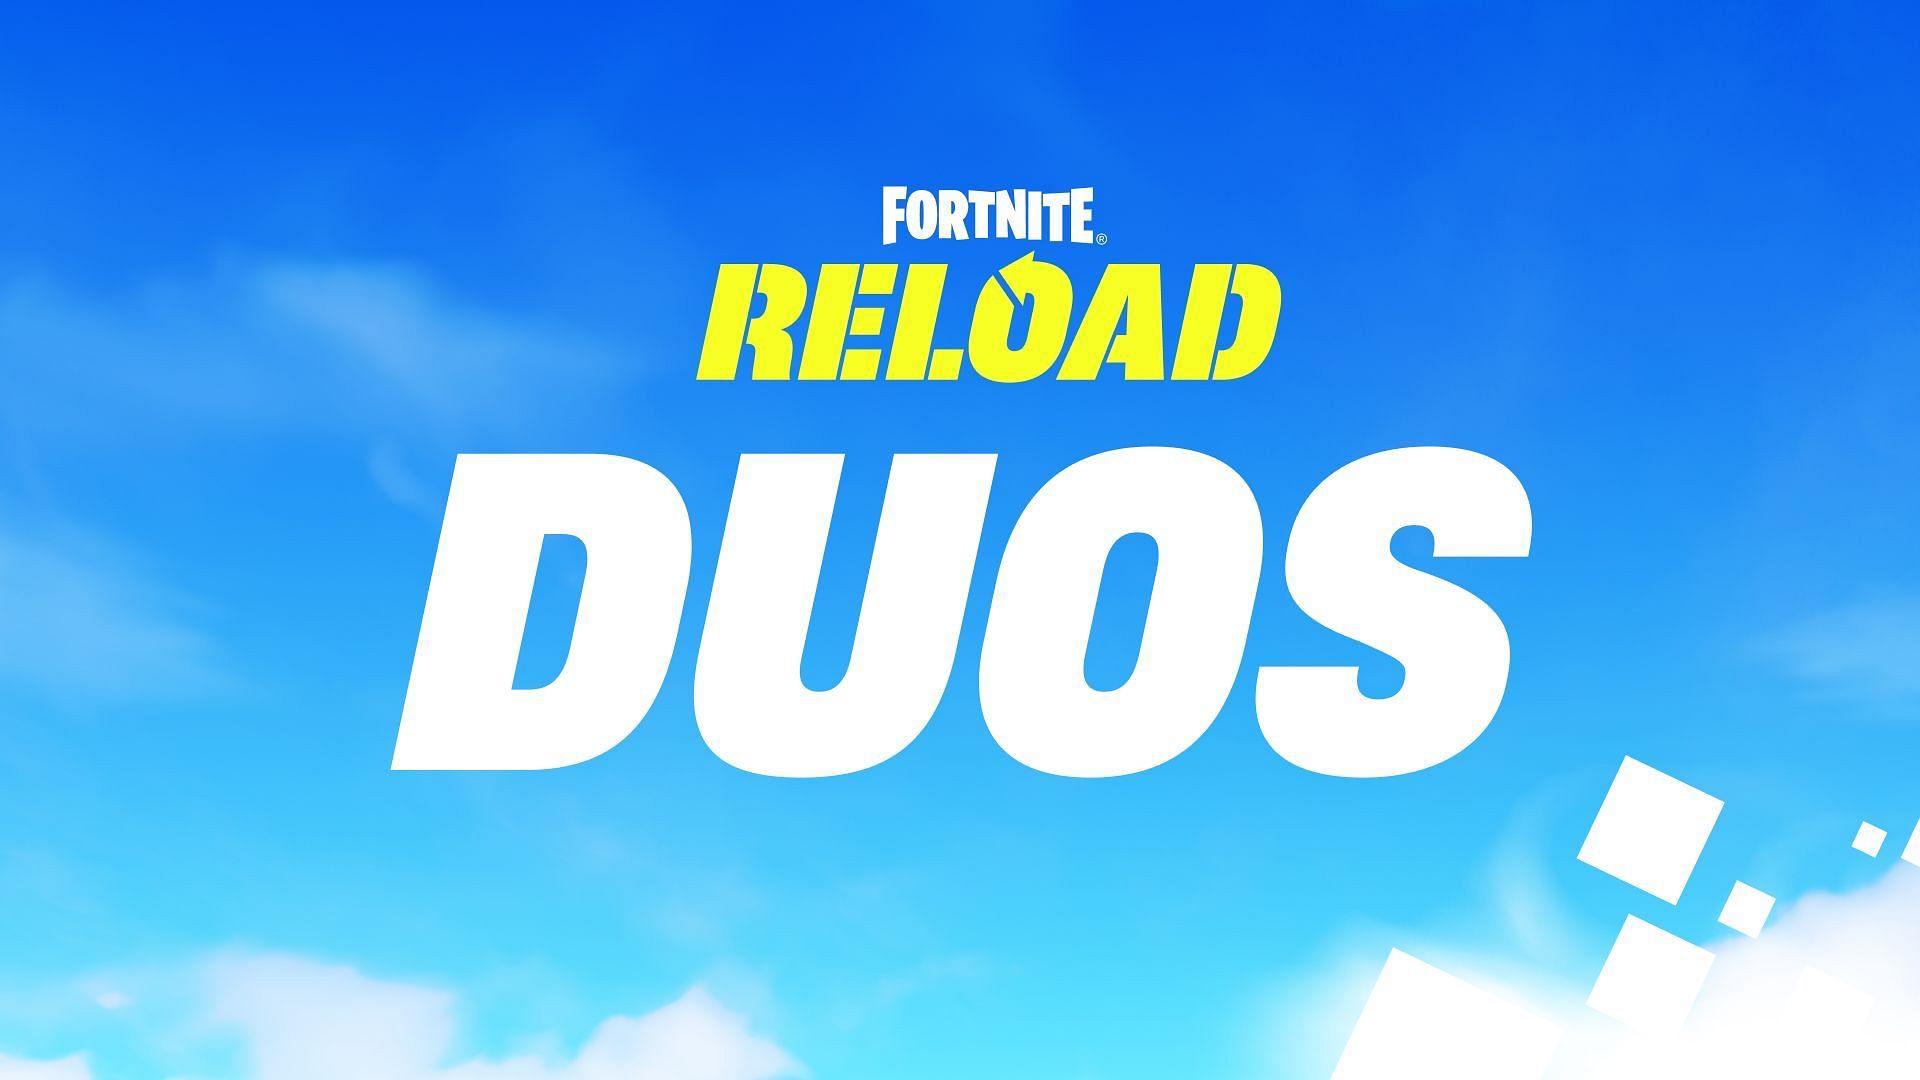 Fortnite Reload Duos Patch Notes revealed